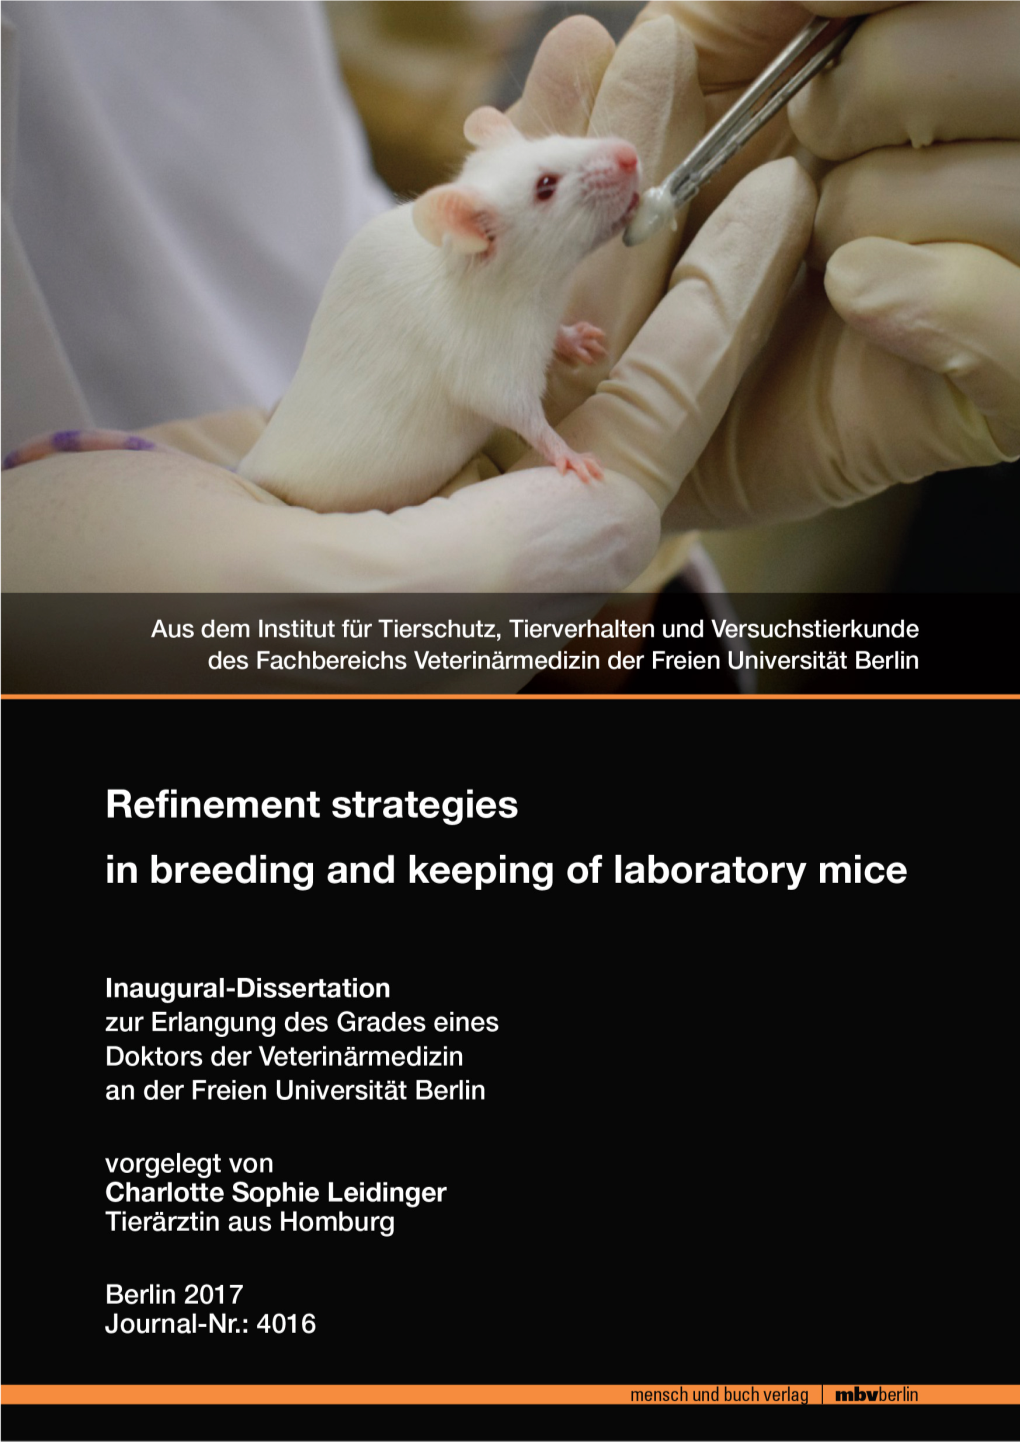 Refinement Strategies in Breeding and Keeping of Laboratory Mice